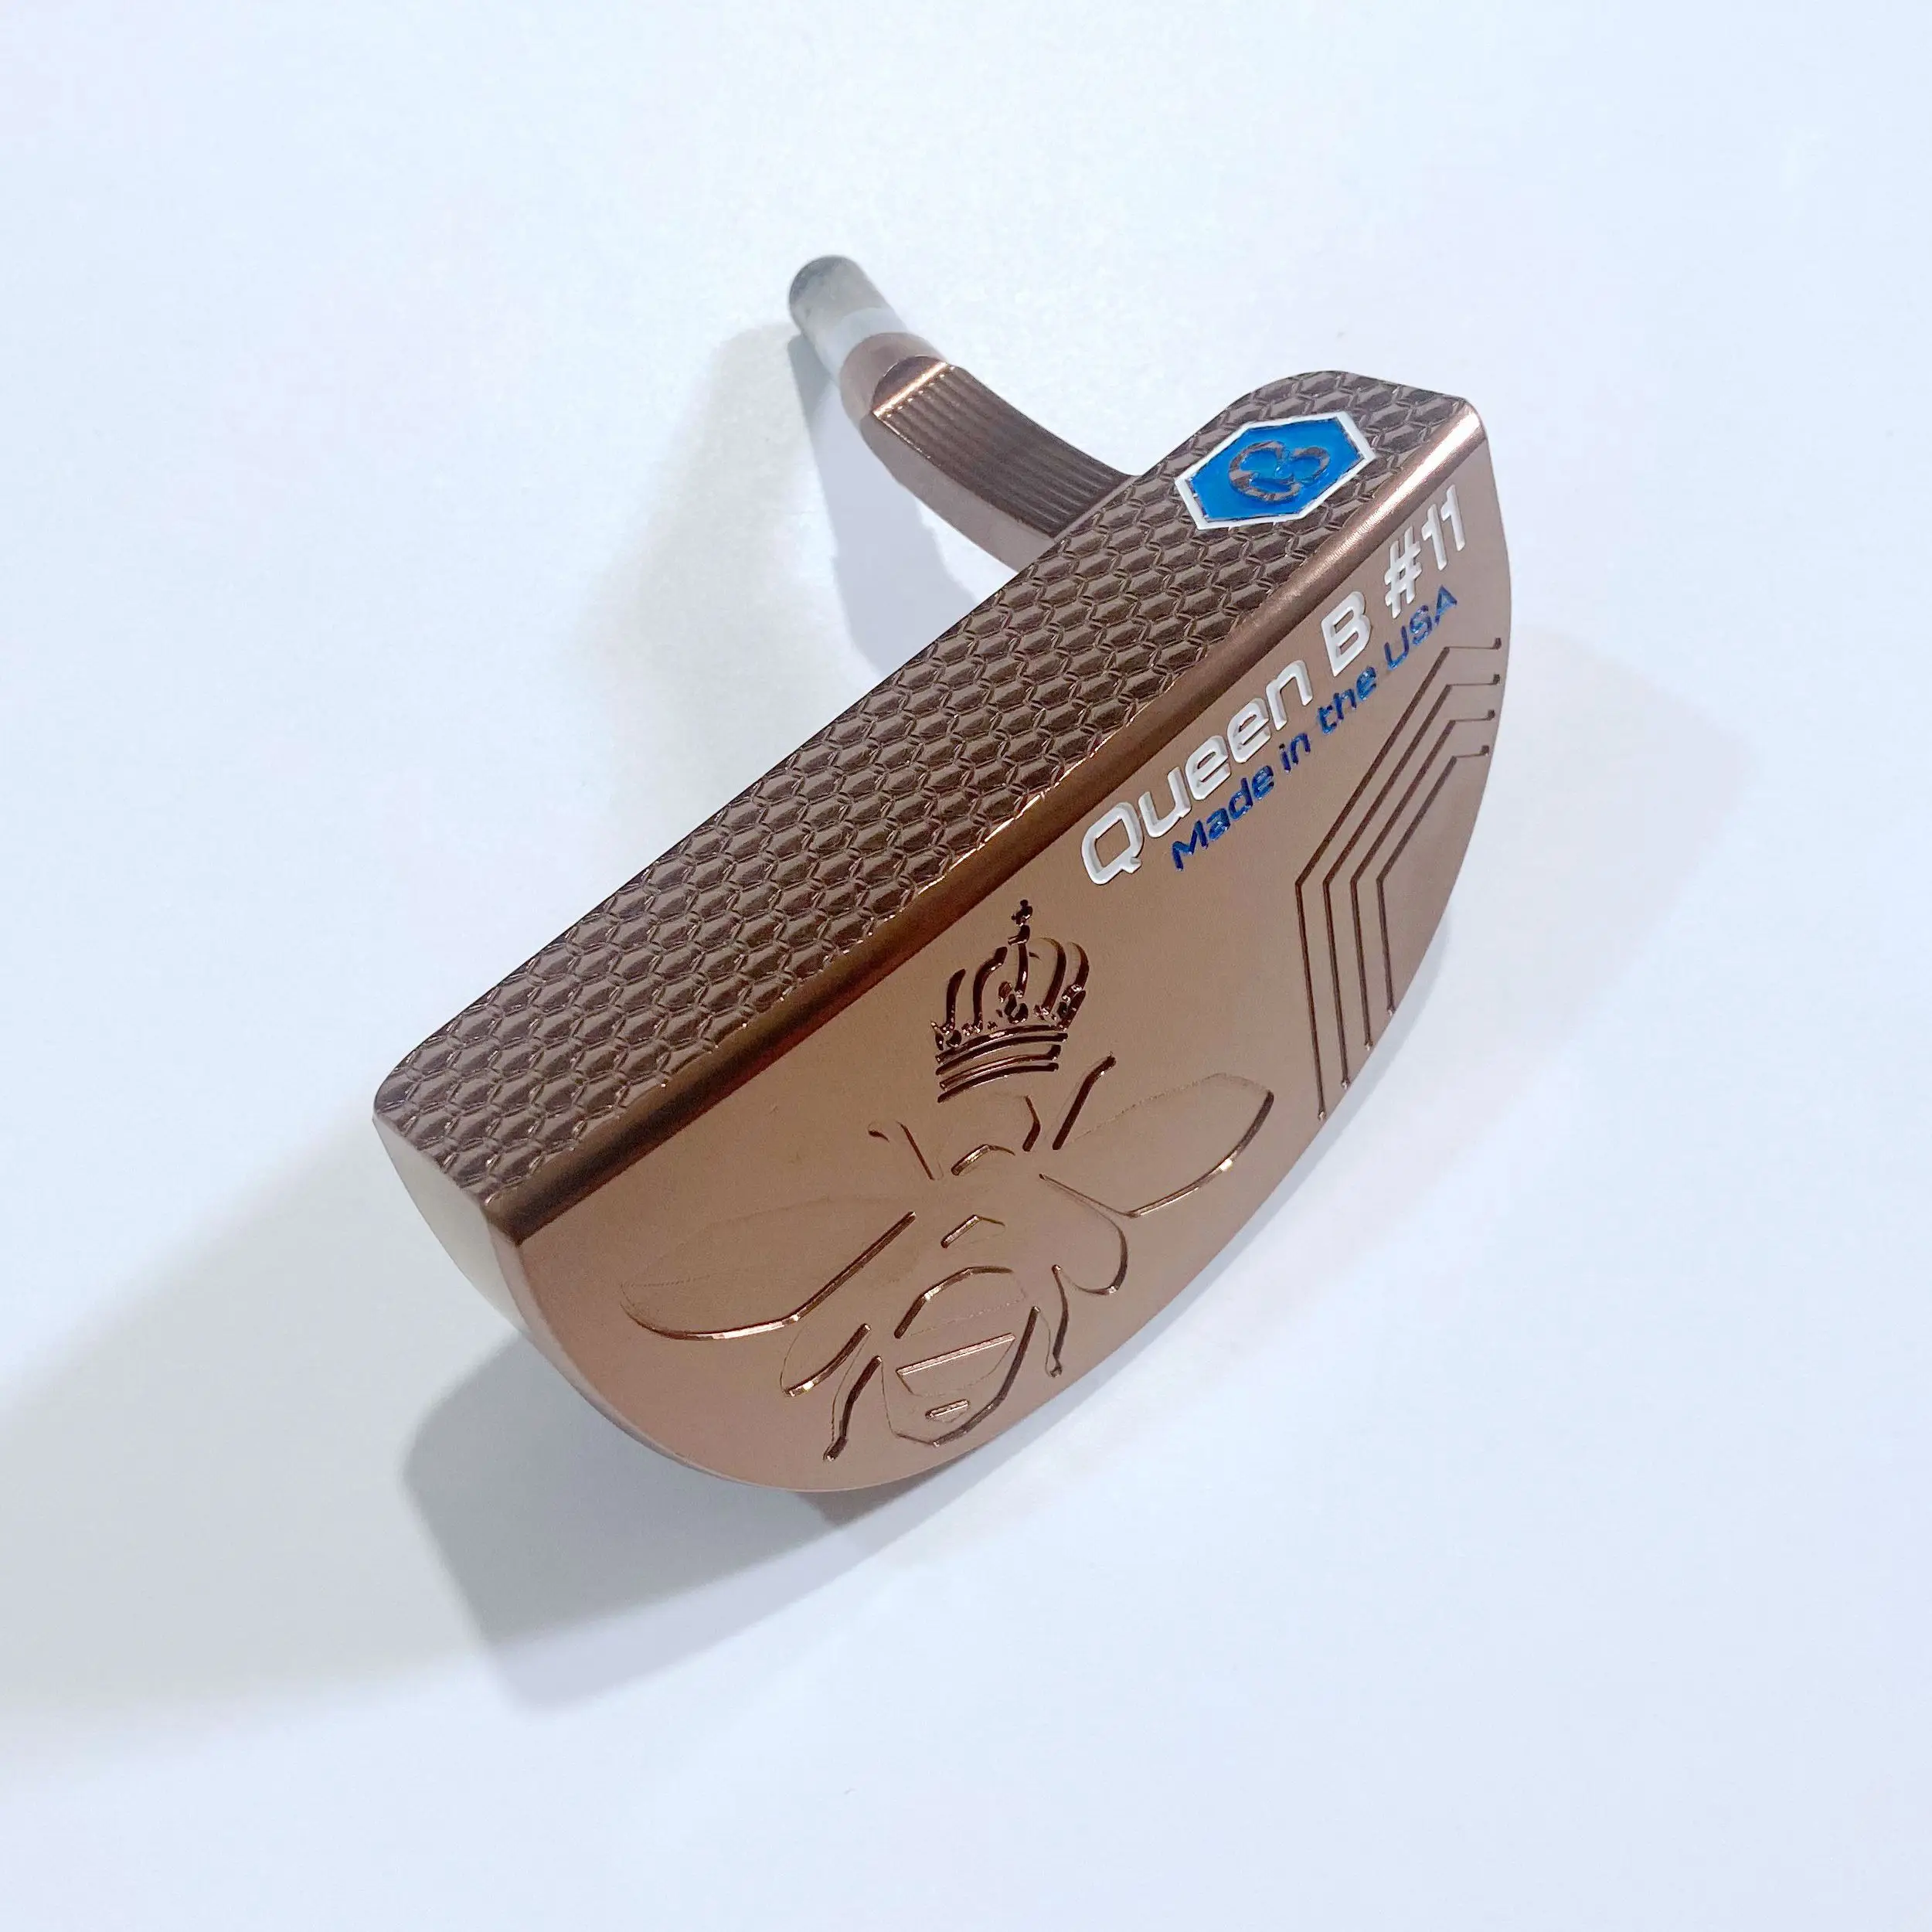 

Yihome Golf Clubs Putter Head Only Bettinardi Queen B 11# Forged Free Shipping Soft Iron